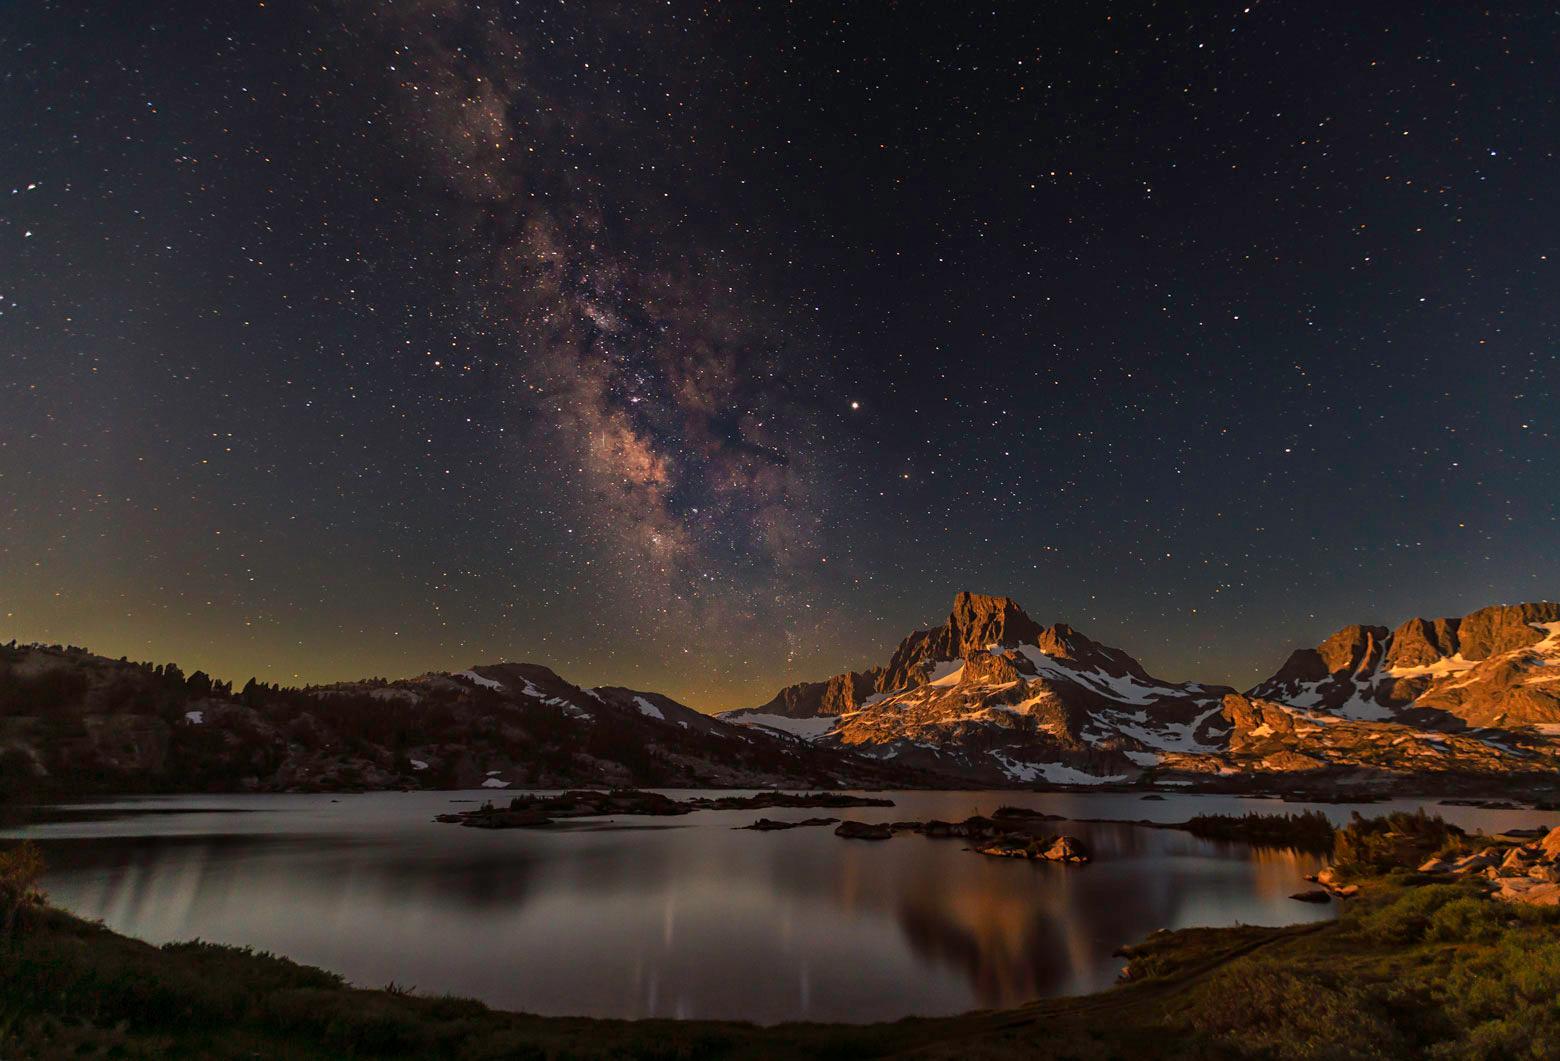 Moon rise and the Milky Way